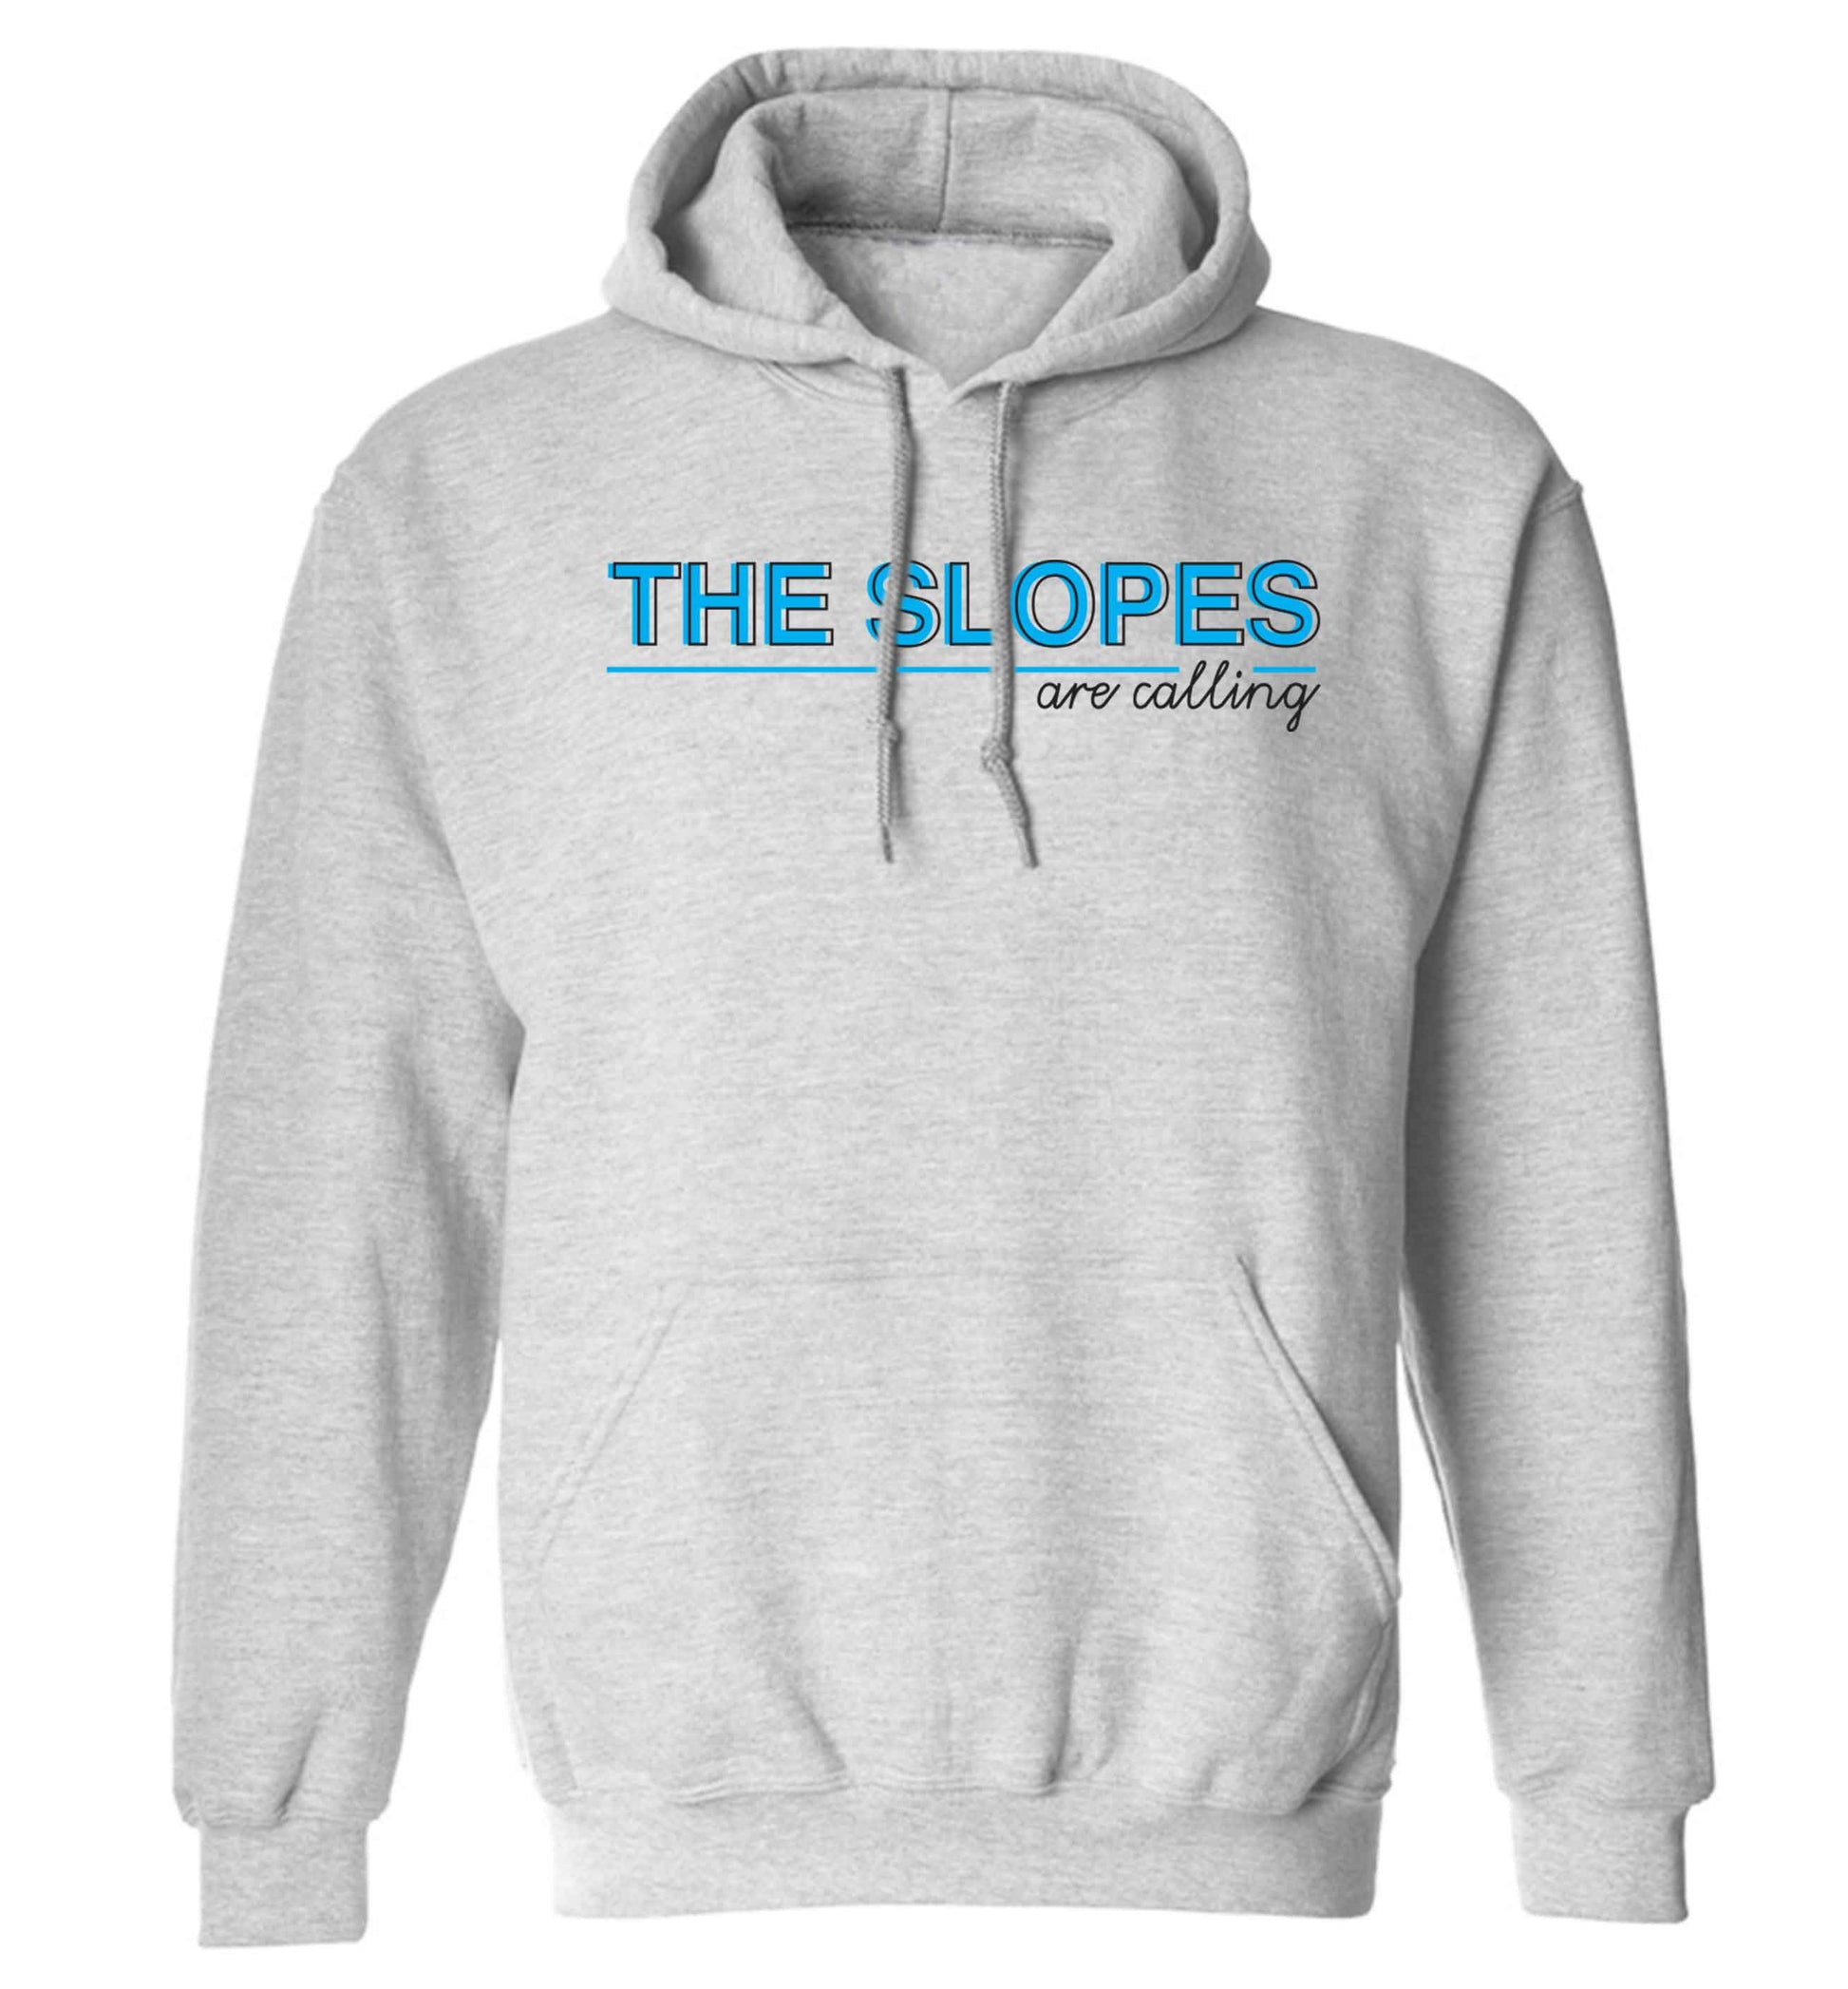 The slopes are calling adults unisex grey hoodie 2XL